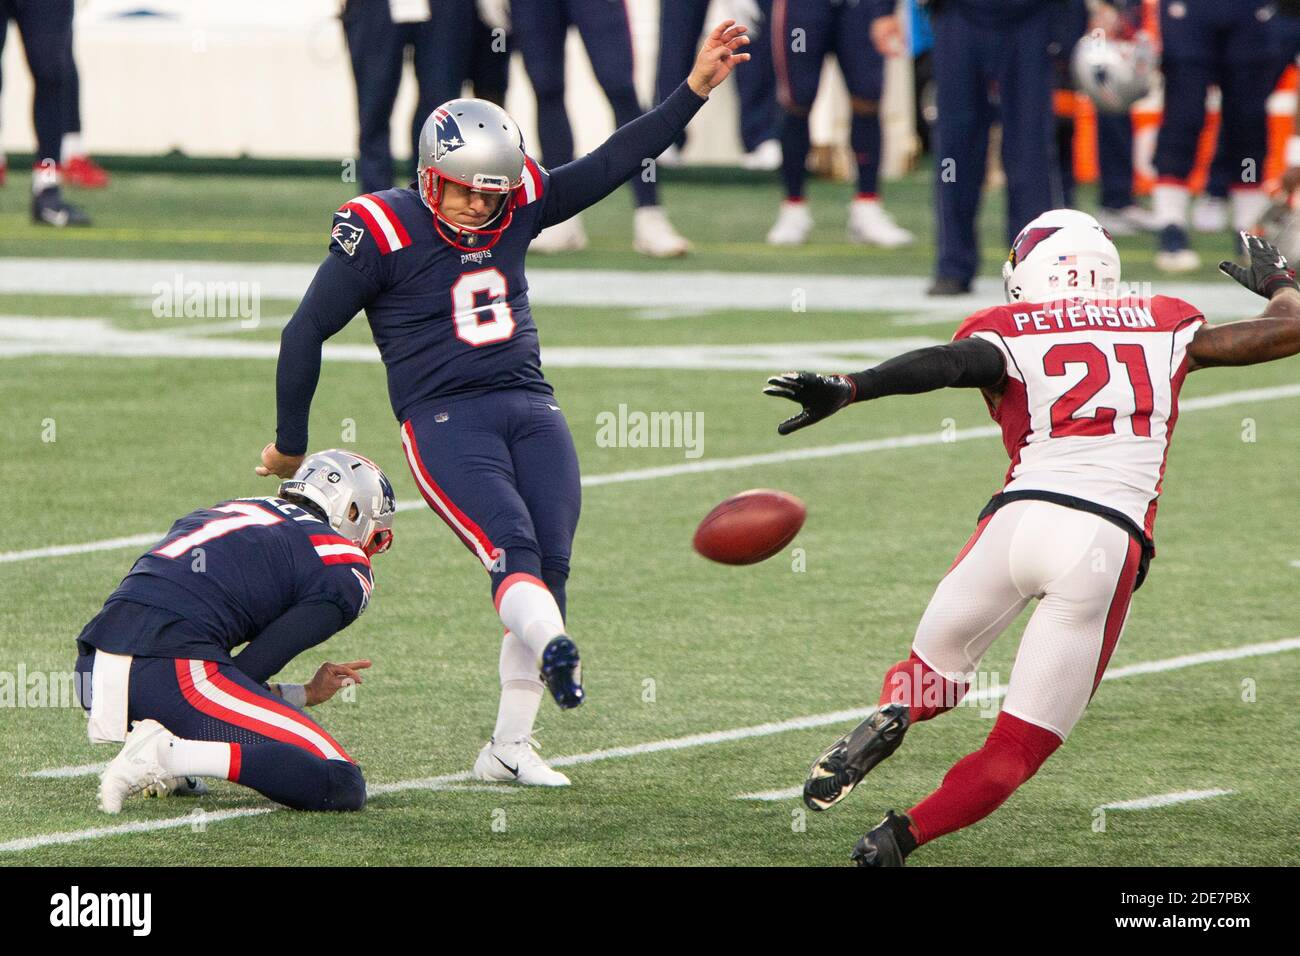 Foxborough, United States. 29th Nov, 2020. New England Patriots kicker Nick Folk (6) connects for a 50-yard game winning field goal held by Jake Bailey (7) while under pressure by Arizona Cardinals cornerback Patrick Peterson (21) in the fourth quarter at Gillette Stadium in Foxborough, Massachusetts on Sunday, November 29, 2020. The Patriots defeated the Cardinals 20-17. Photo by Matthew Healey/UPI Credit: UPI/Alamy Live News Stock Photo